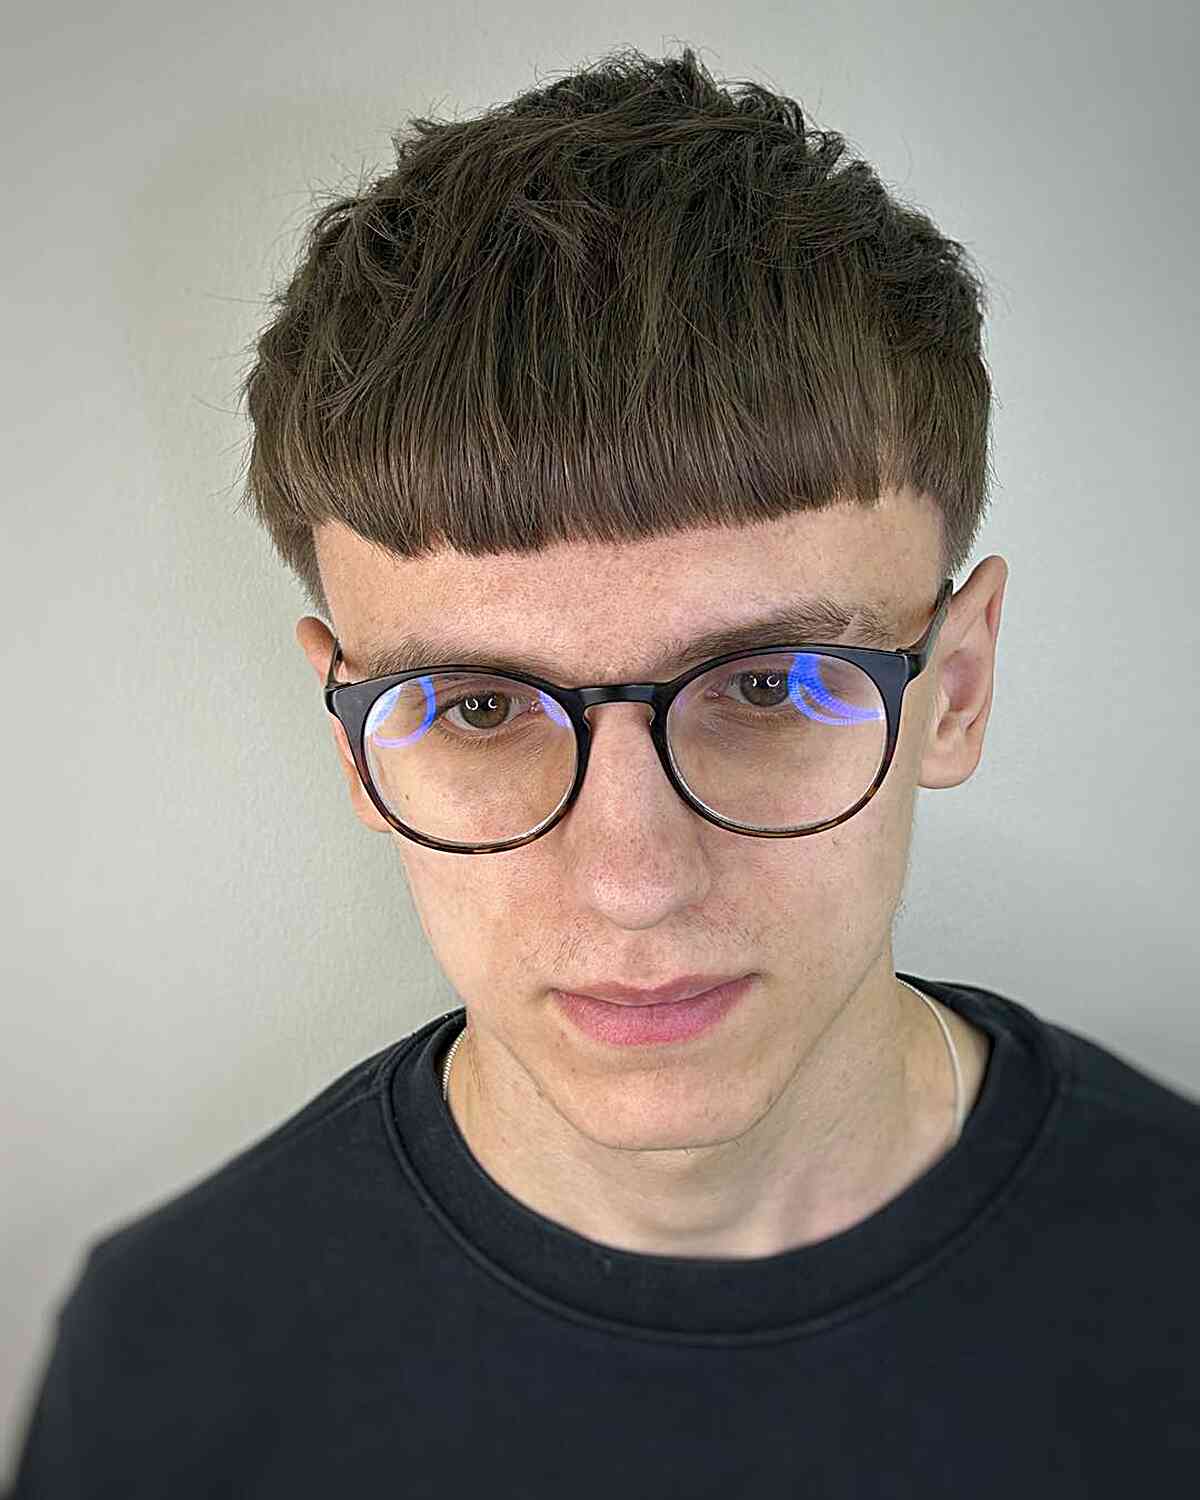 Edgar Cut with Textured Top and Straight Fringe for Boys with Glasses